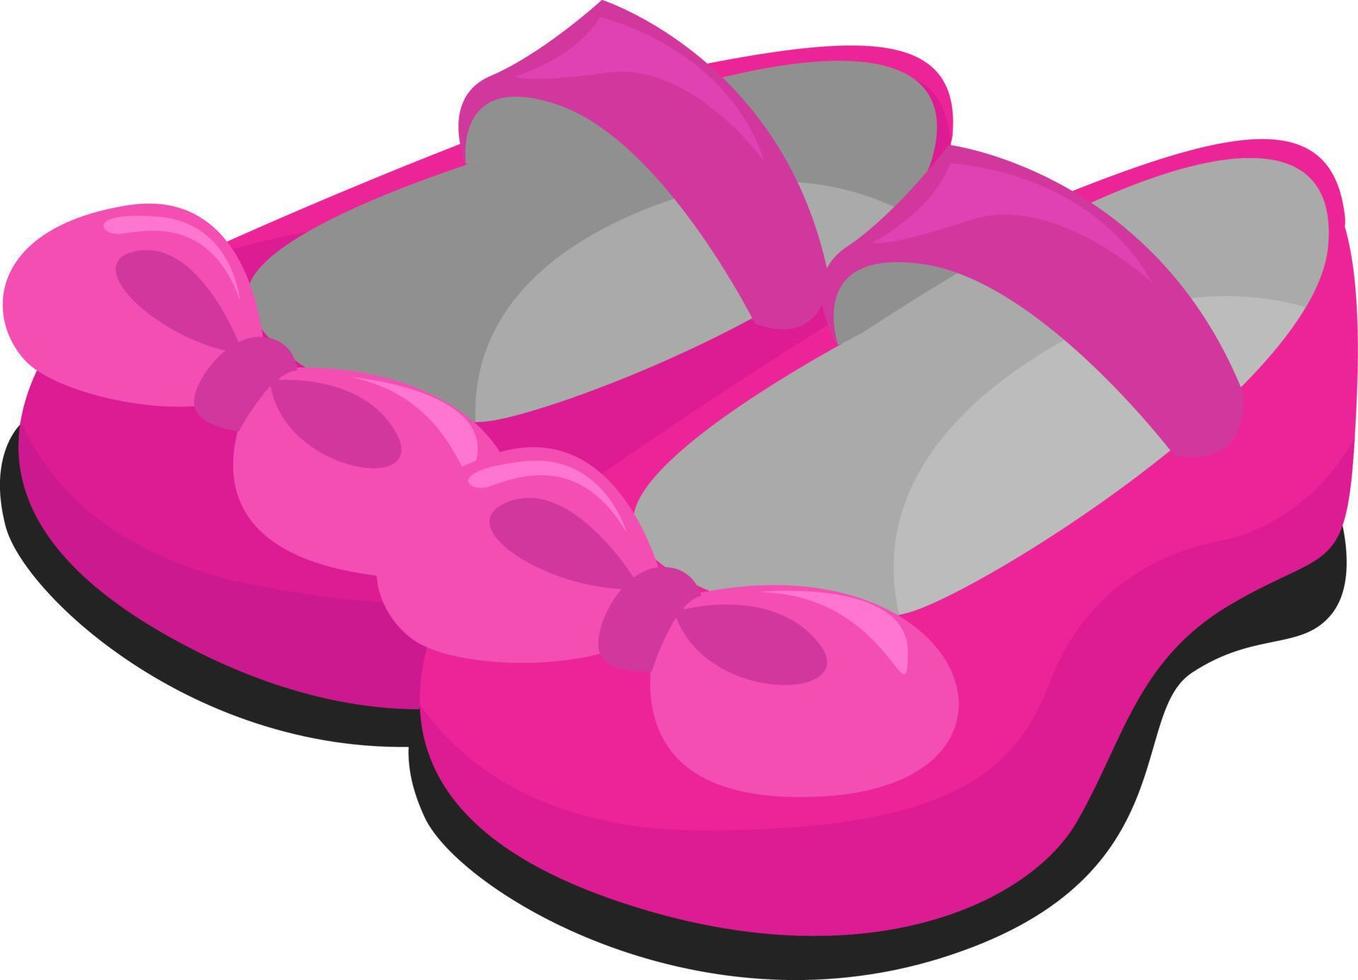 Pink shoes, illustration, vector on white background